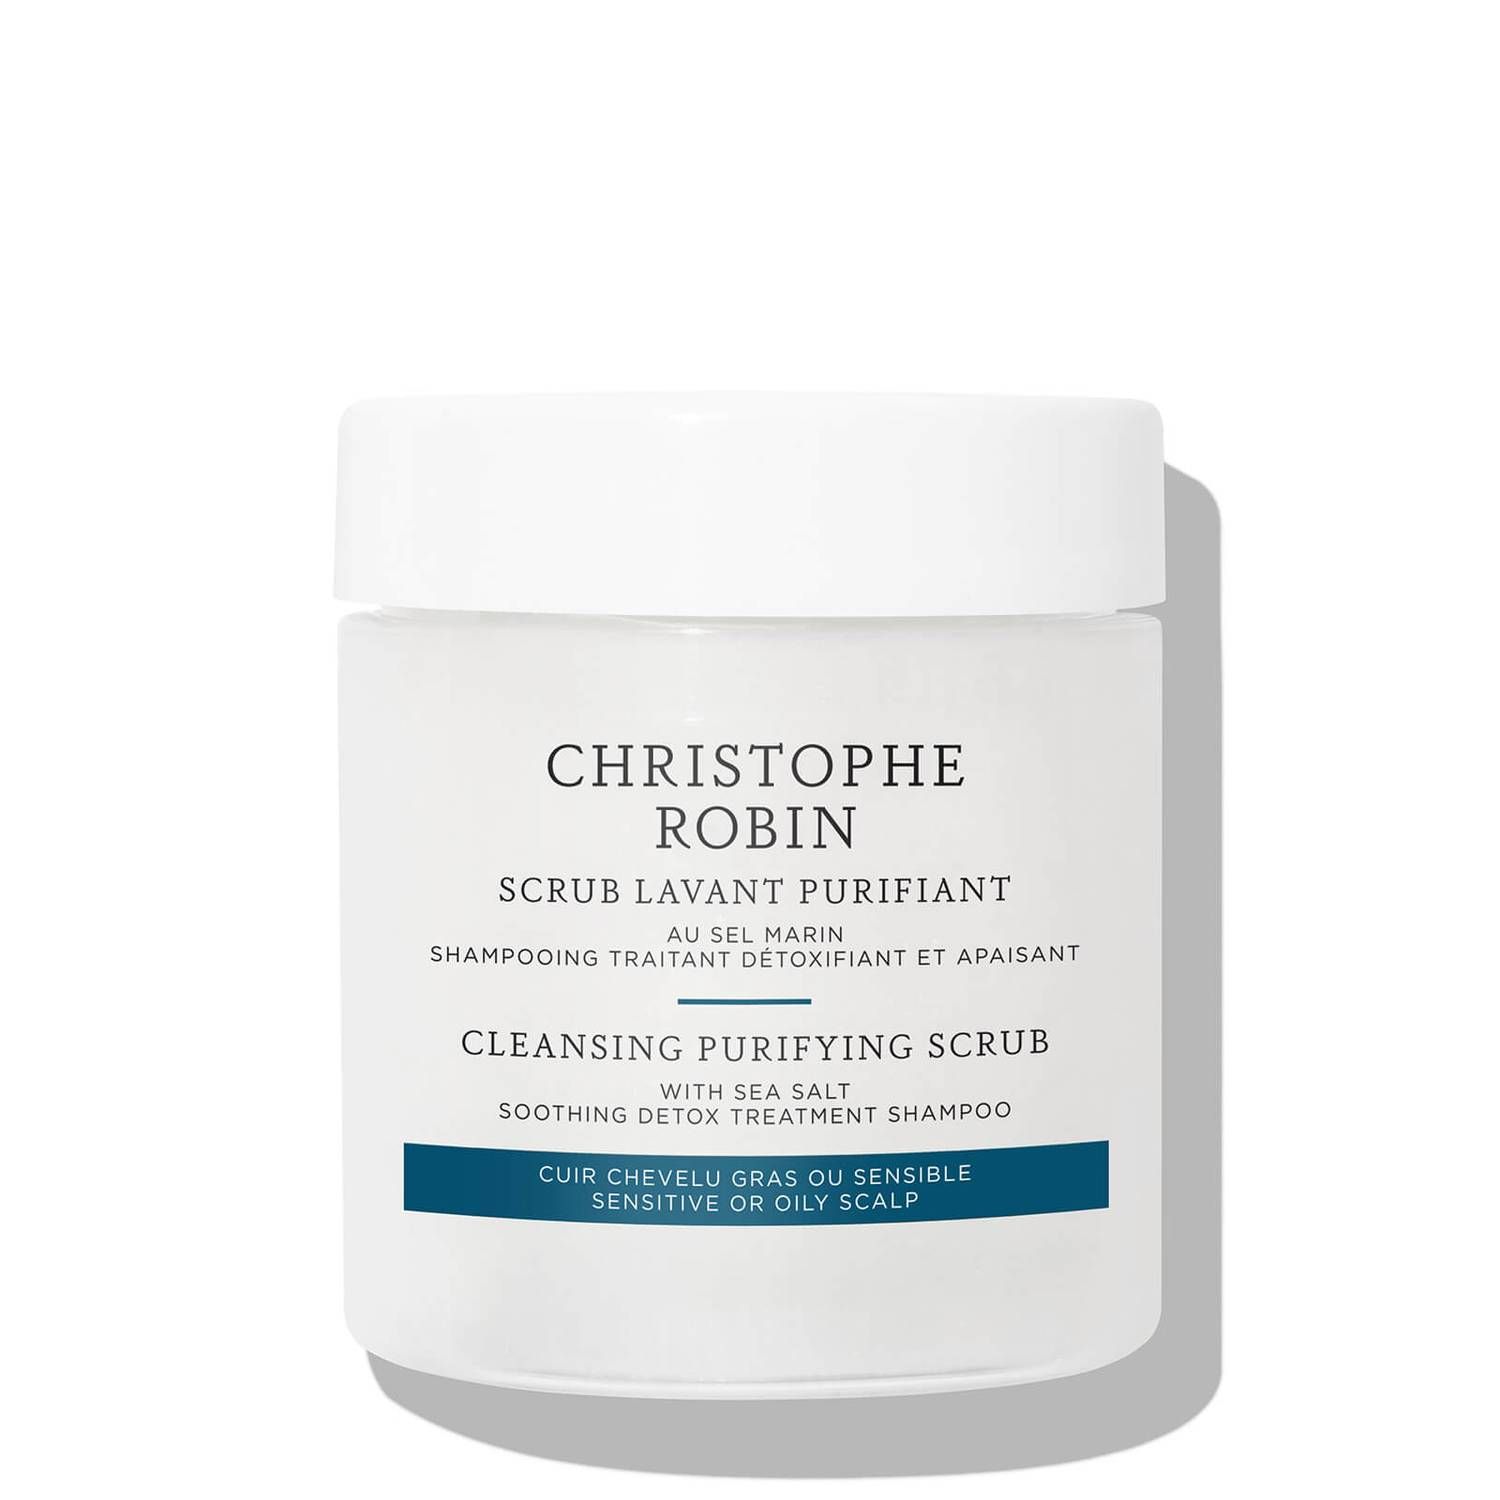 Christophe Robin Cleansing Purifying Scrub with Sea Salt 75ml | Dermstore